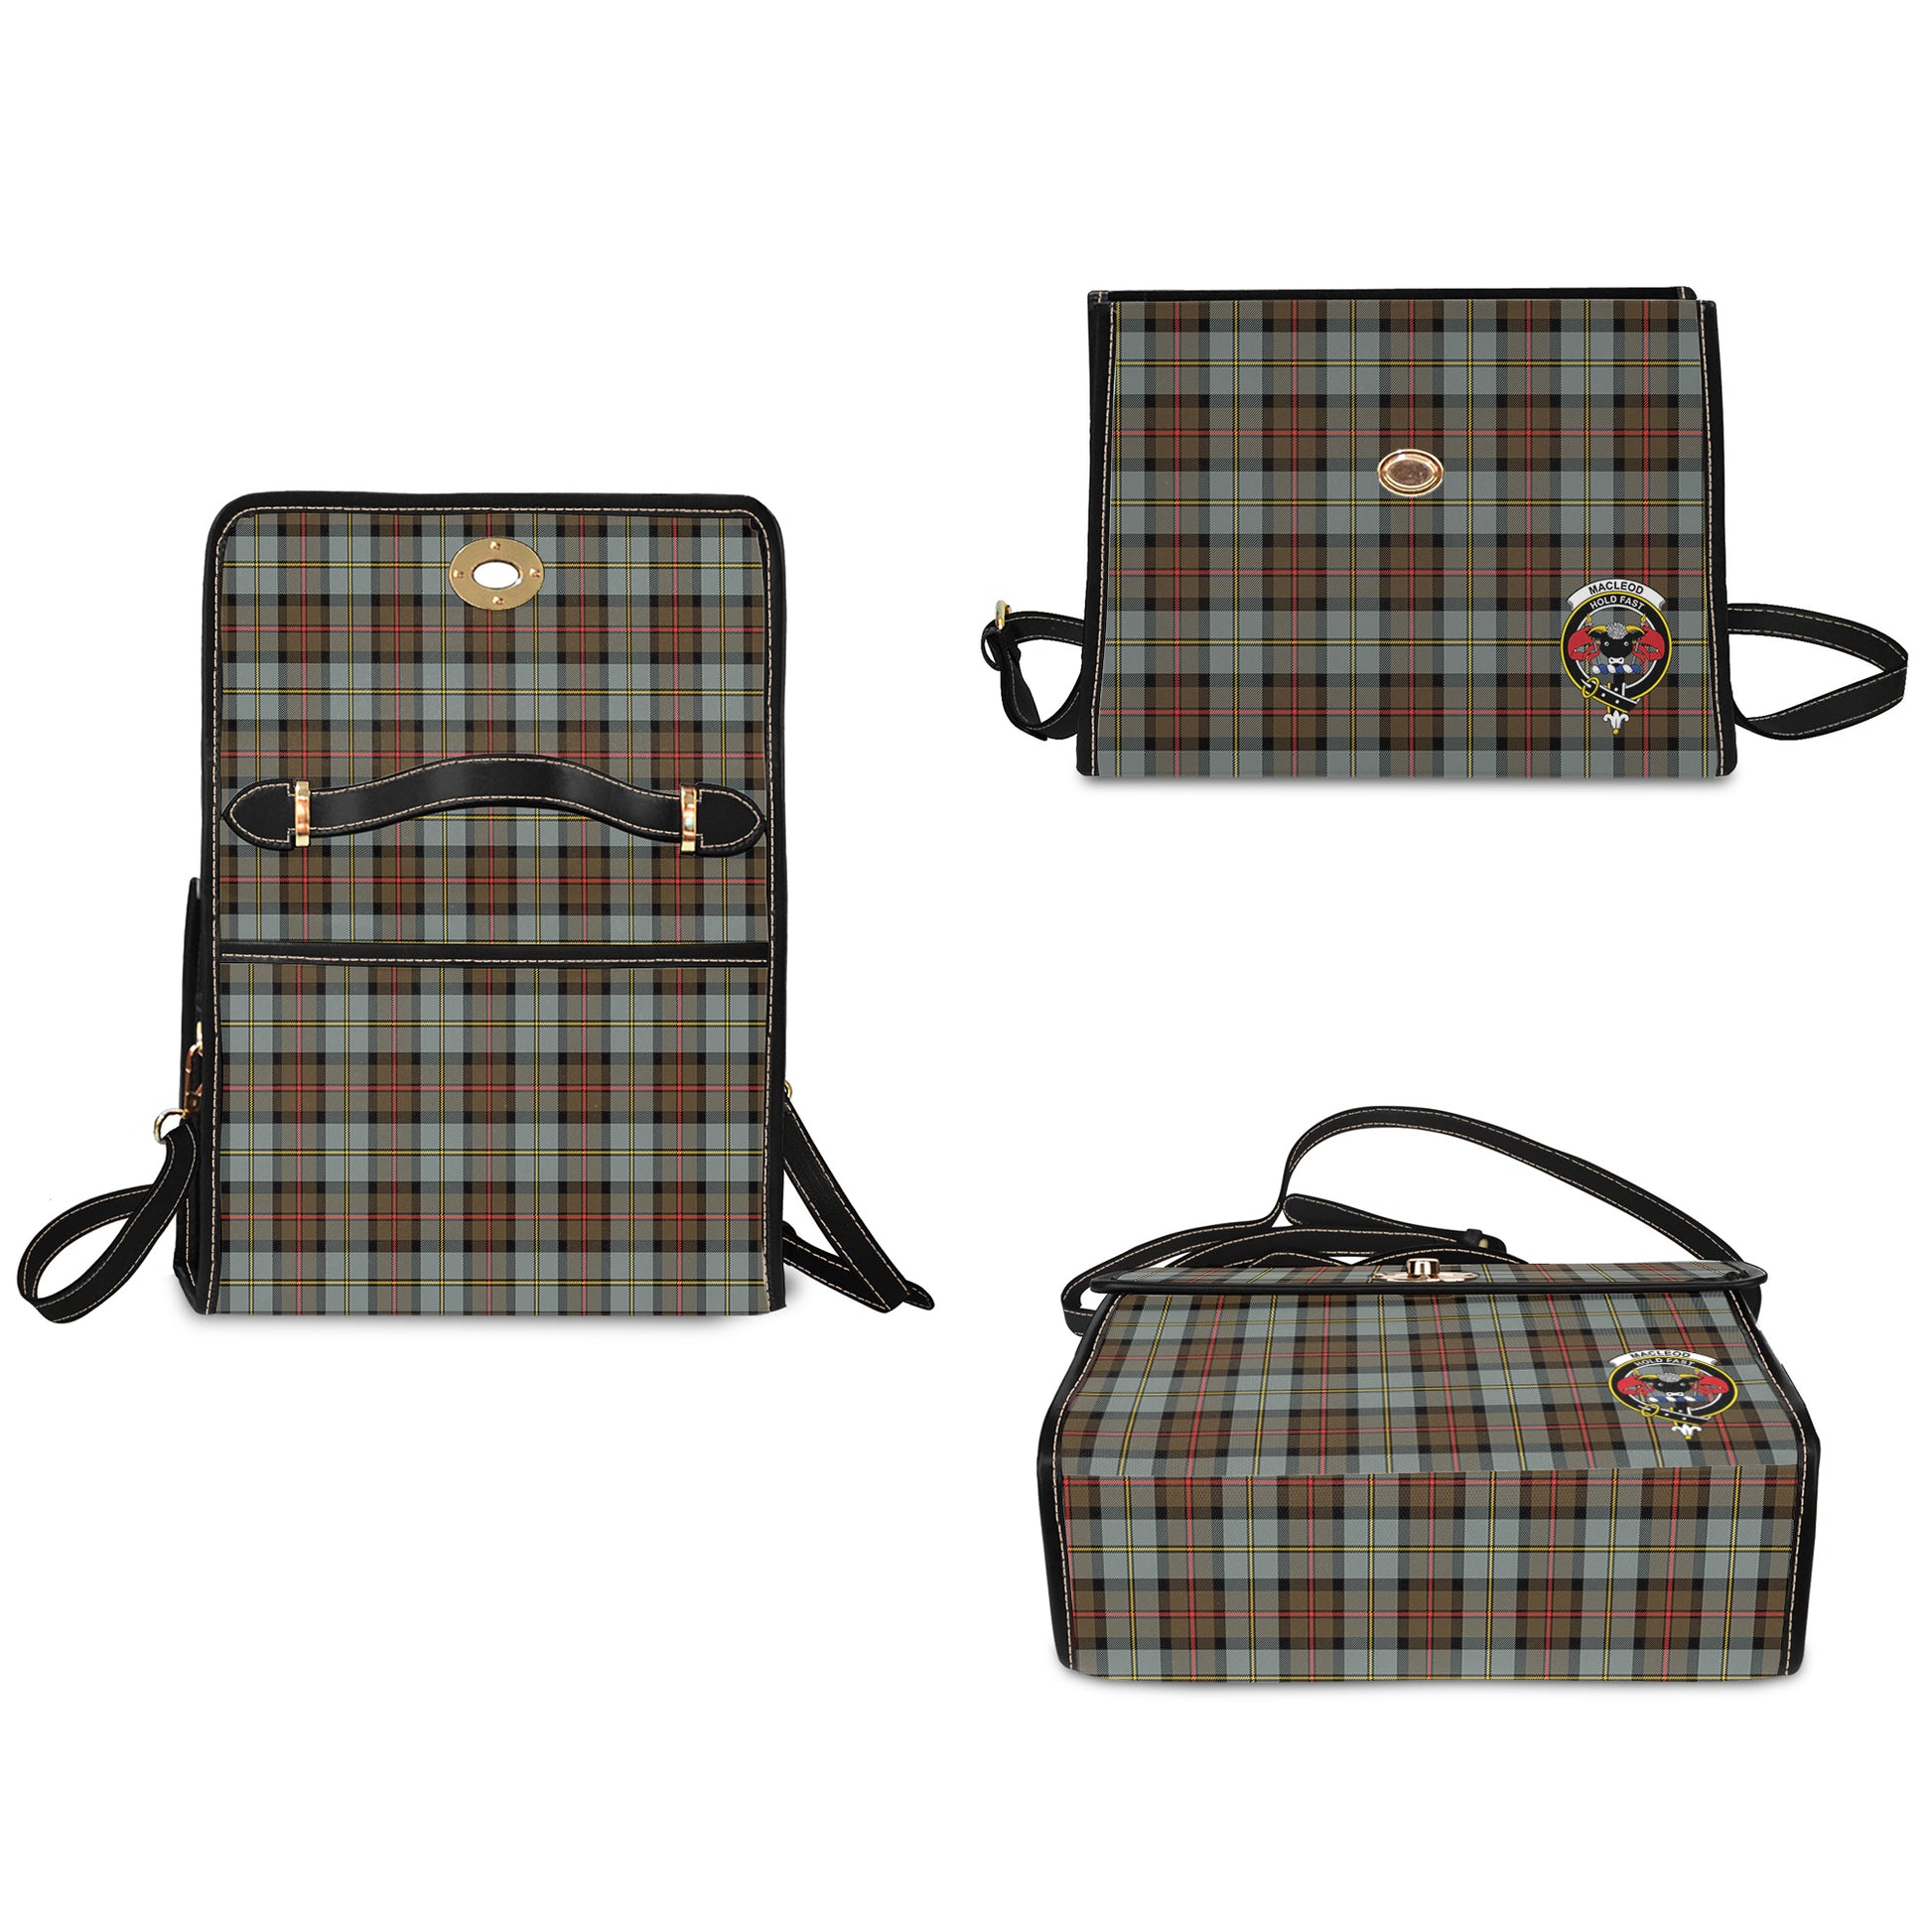 macleod-of-harris-weathered-tartan-leather-strap-waterproof-canvas-bag-with-family-crest